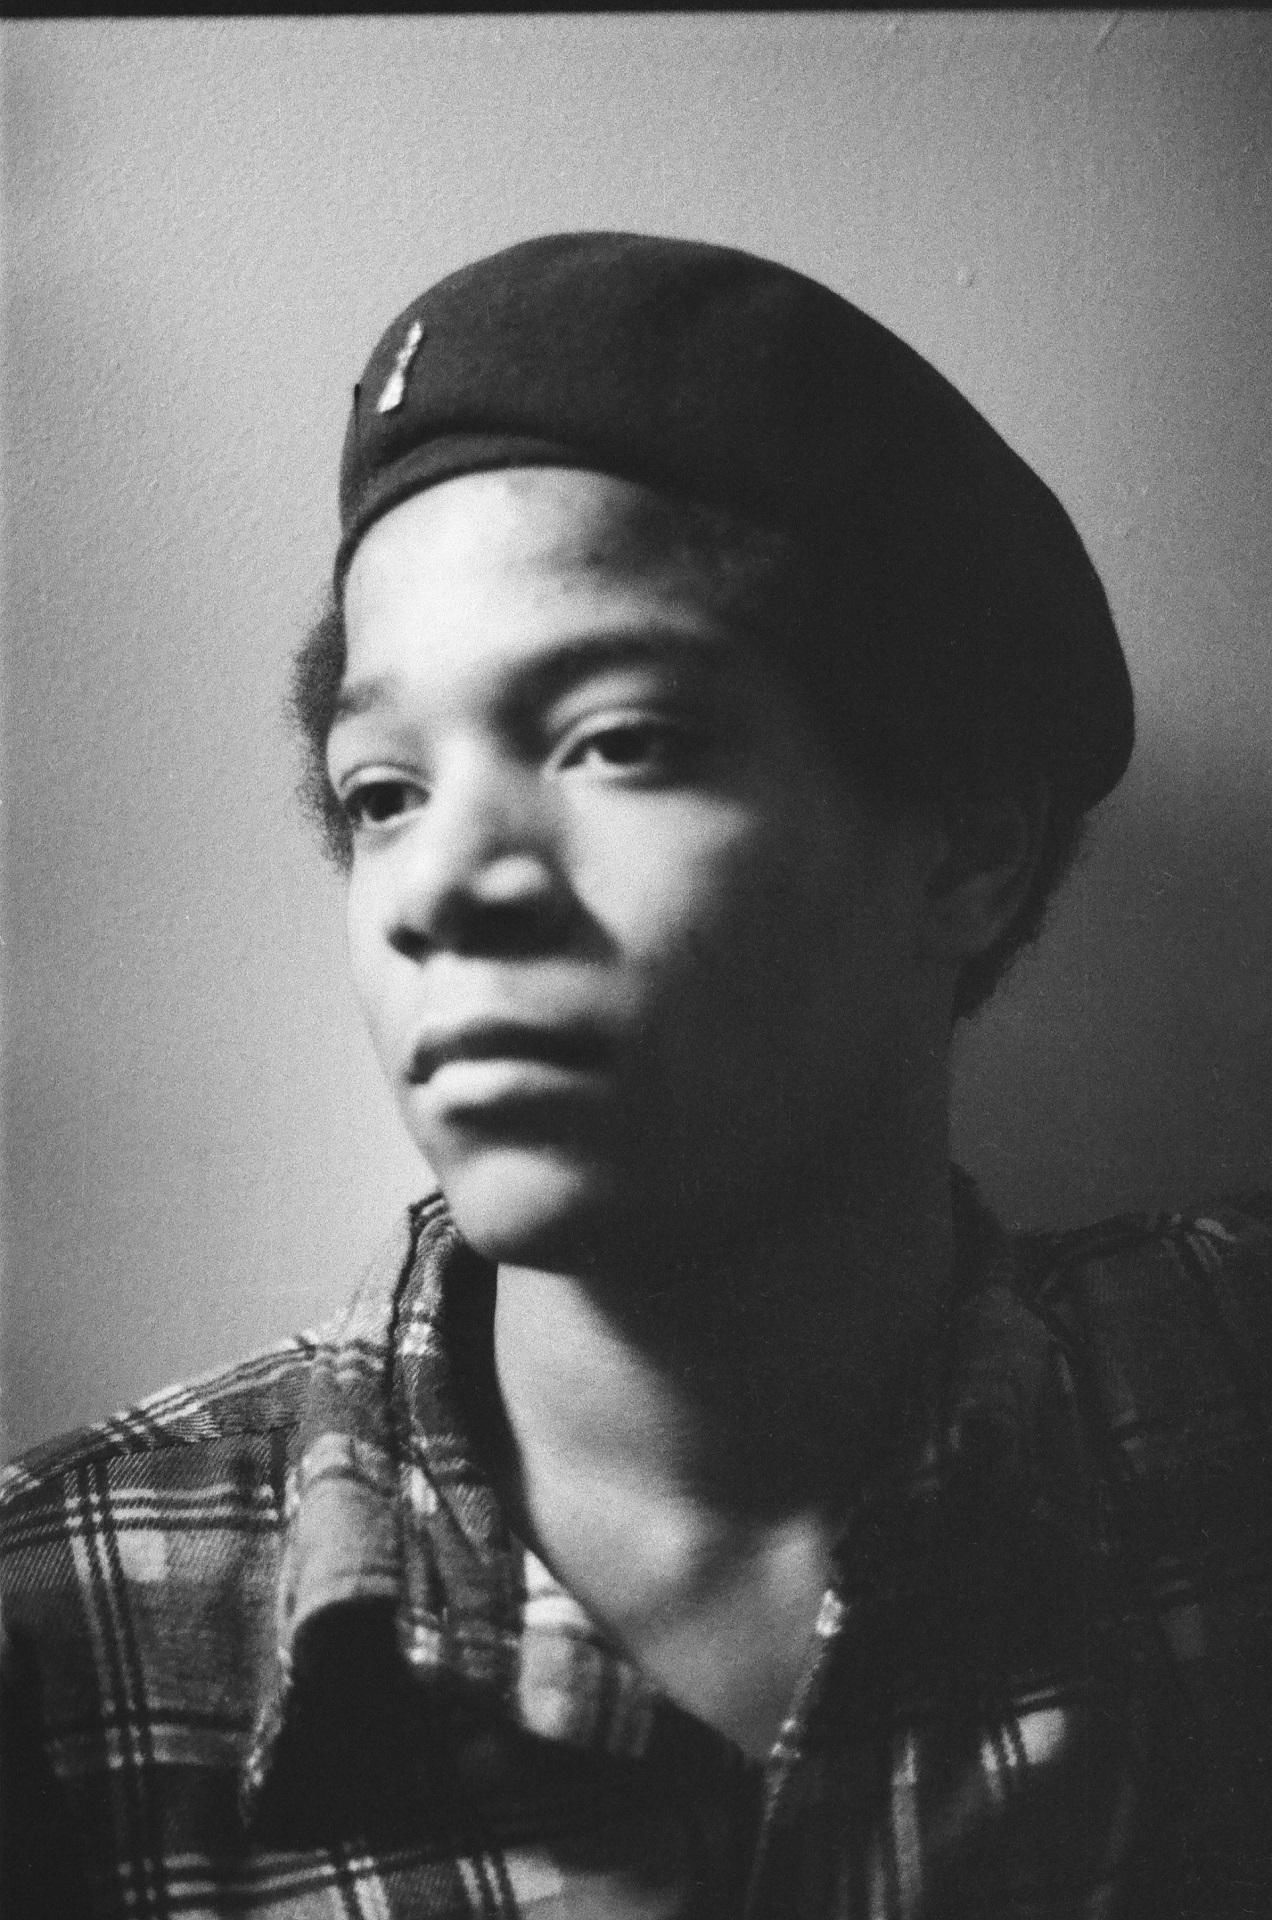 BOOM FOR REAL: THE LATE TEENAGE YEARS OF JEAN-MICHEL BASQUIAT